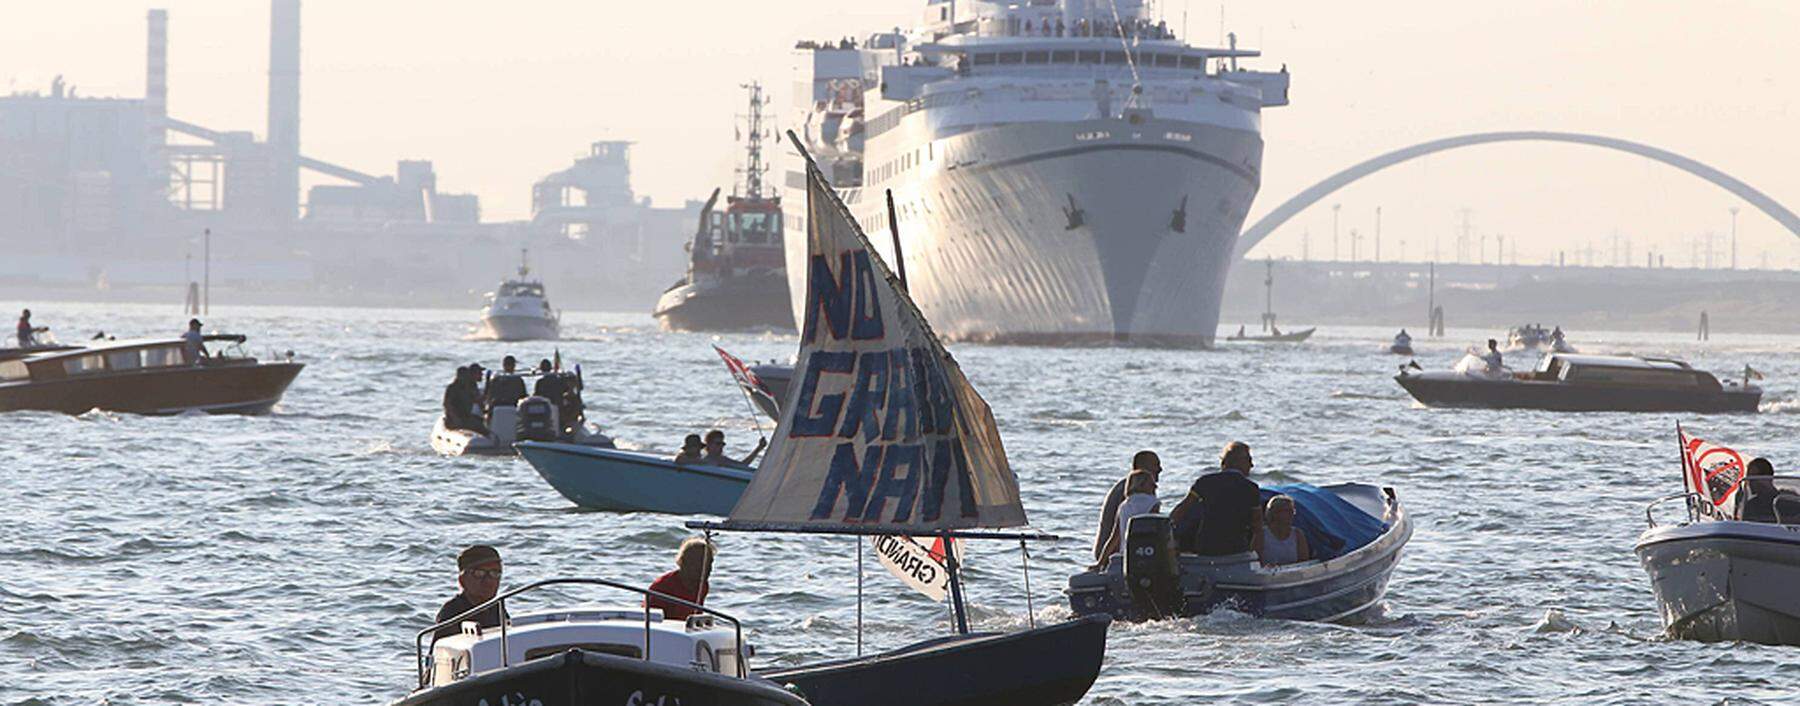 Venice 25 09 2016 Peaceful Demonstration of NO BIG SHIPS Committee against the presence of cruise